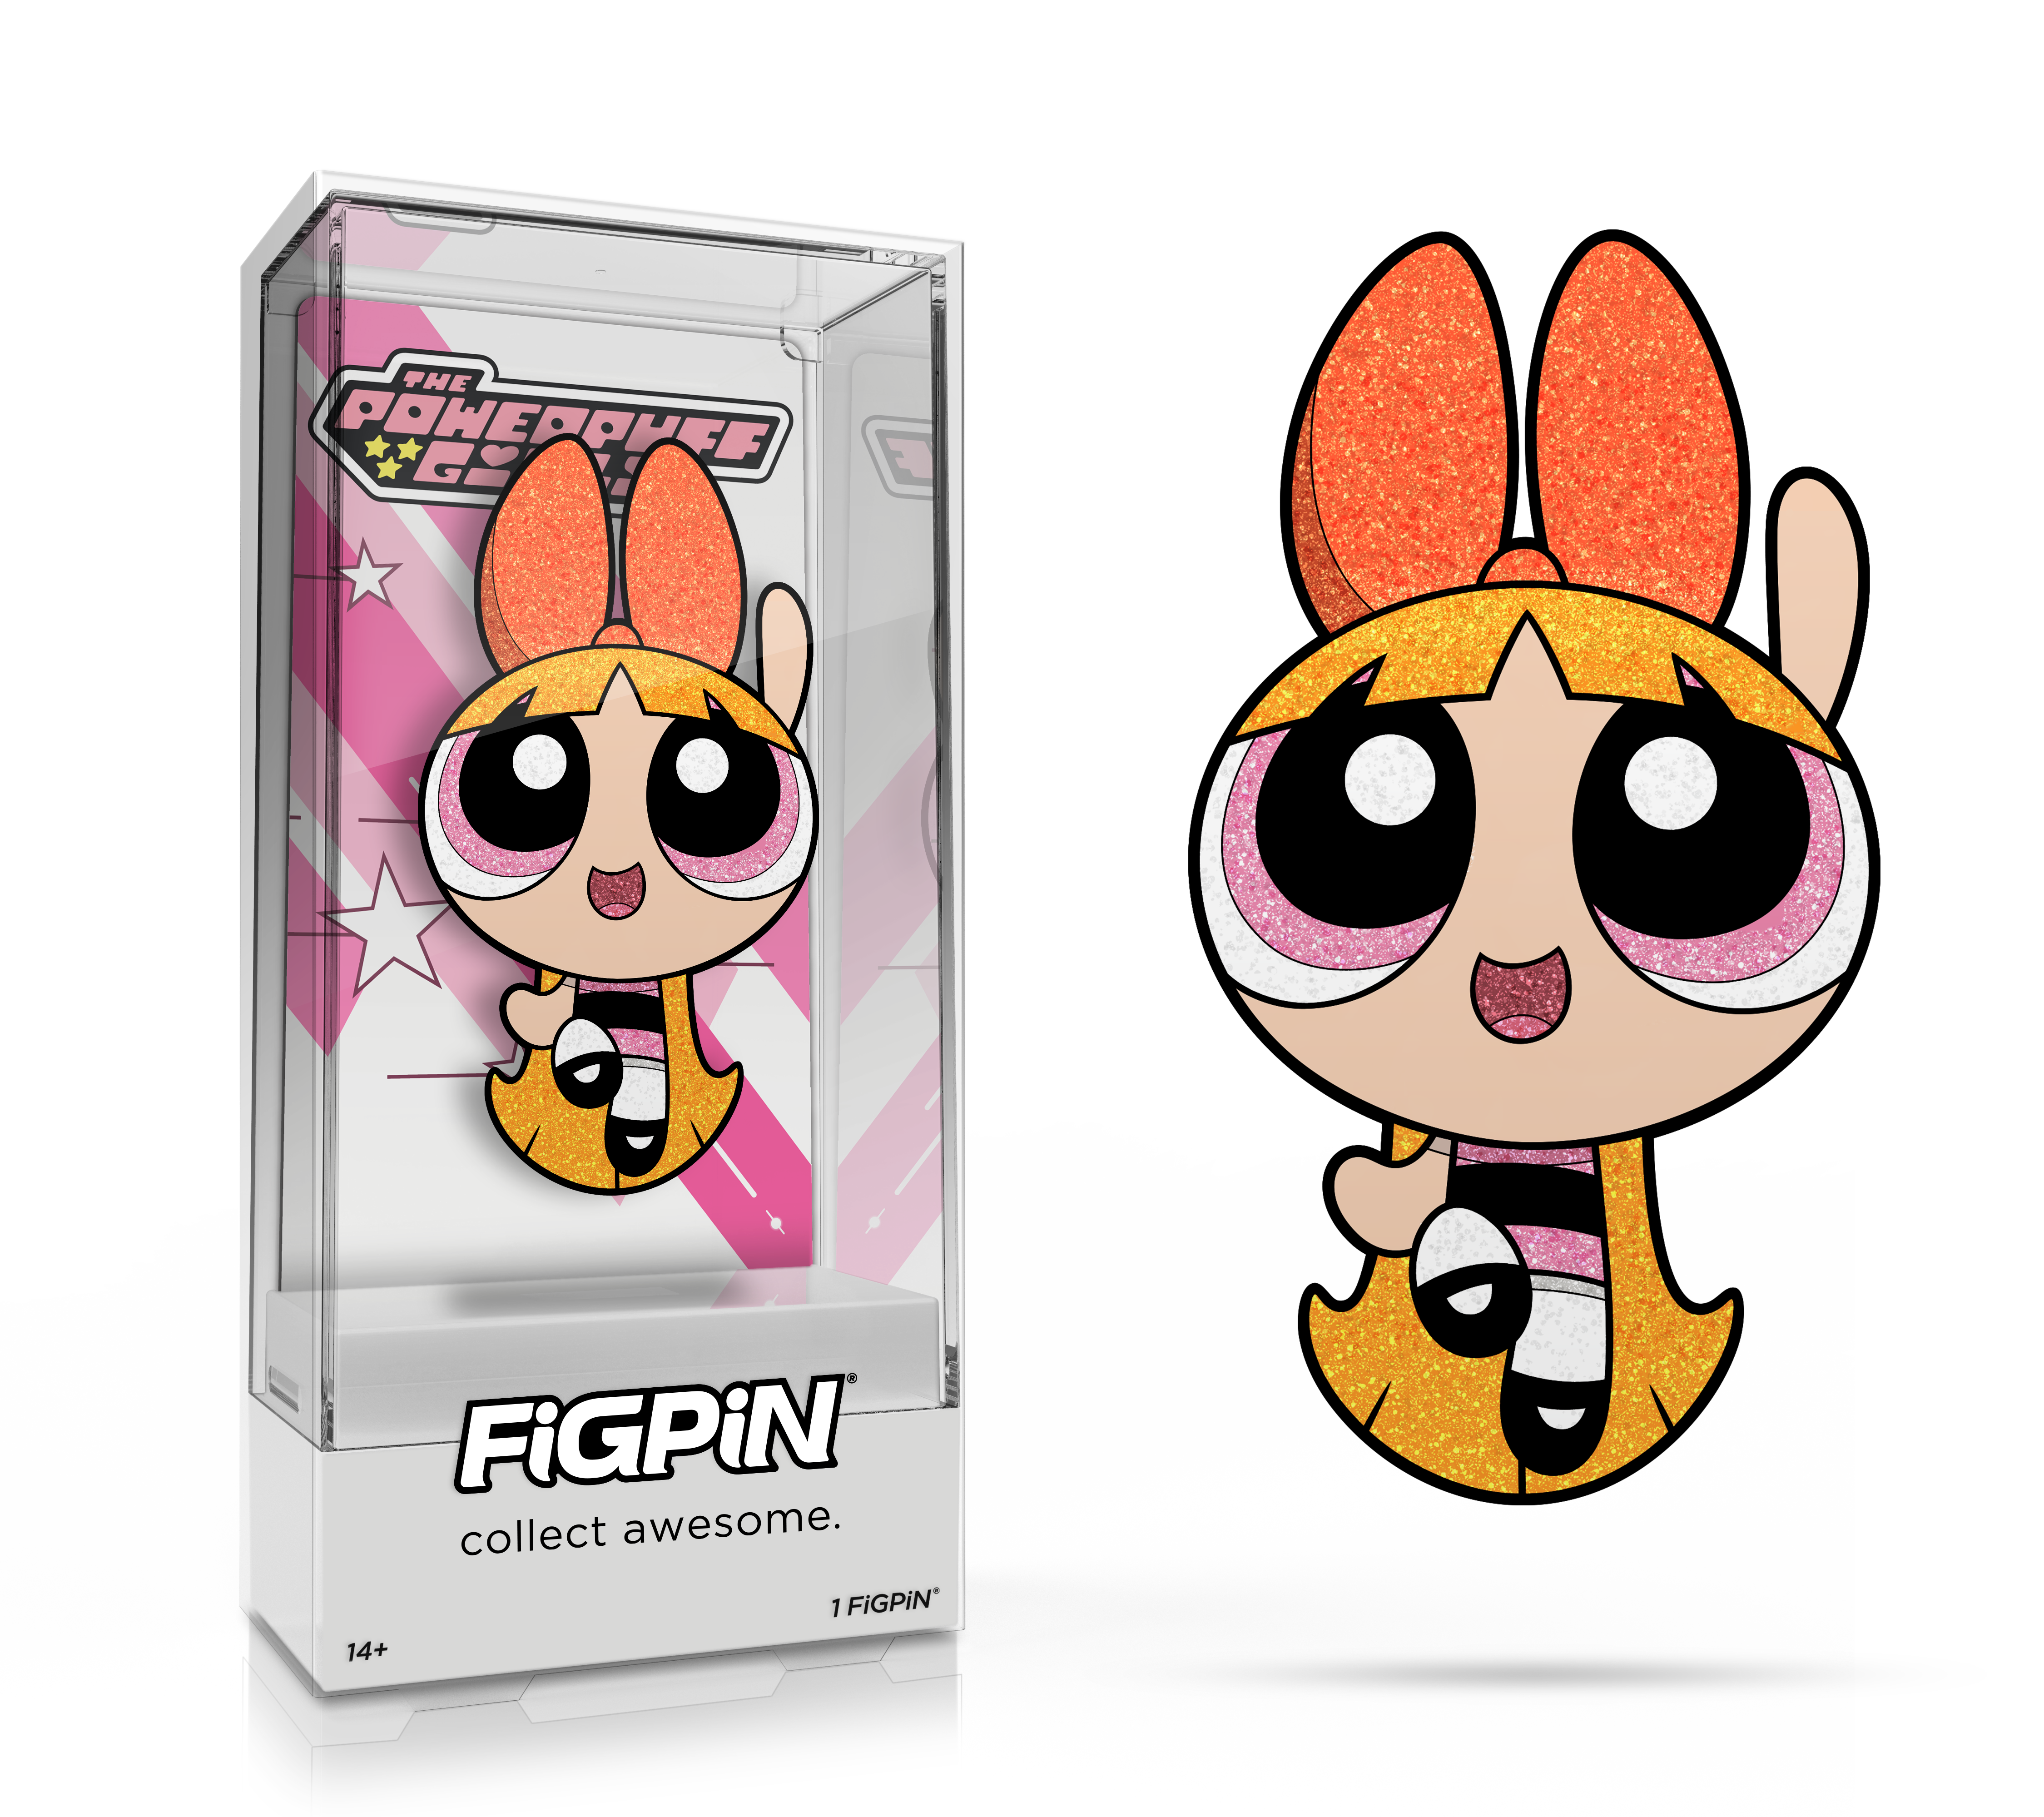 Side by side view of the Blossom enamel pin in display case and the art render.